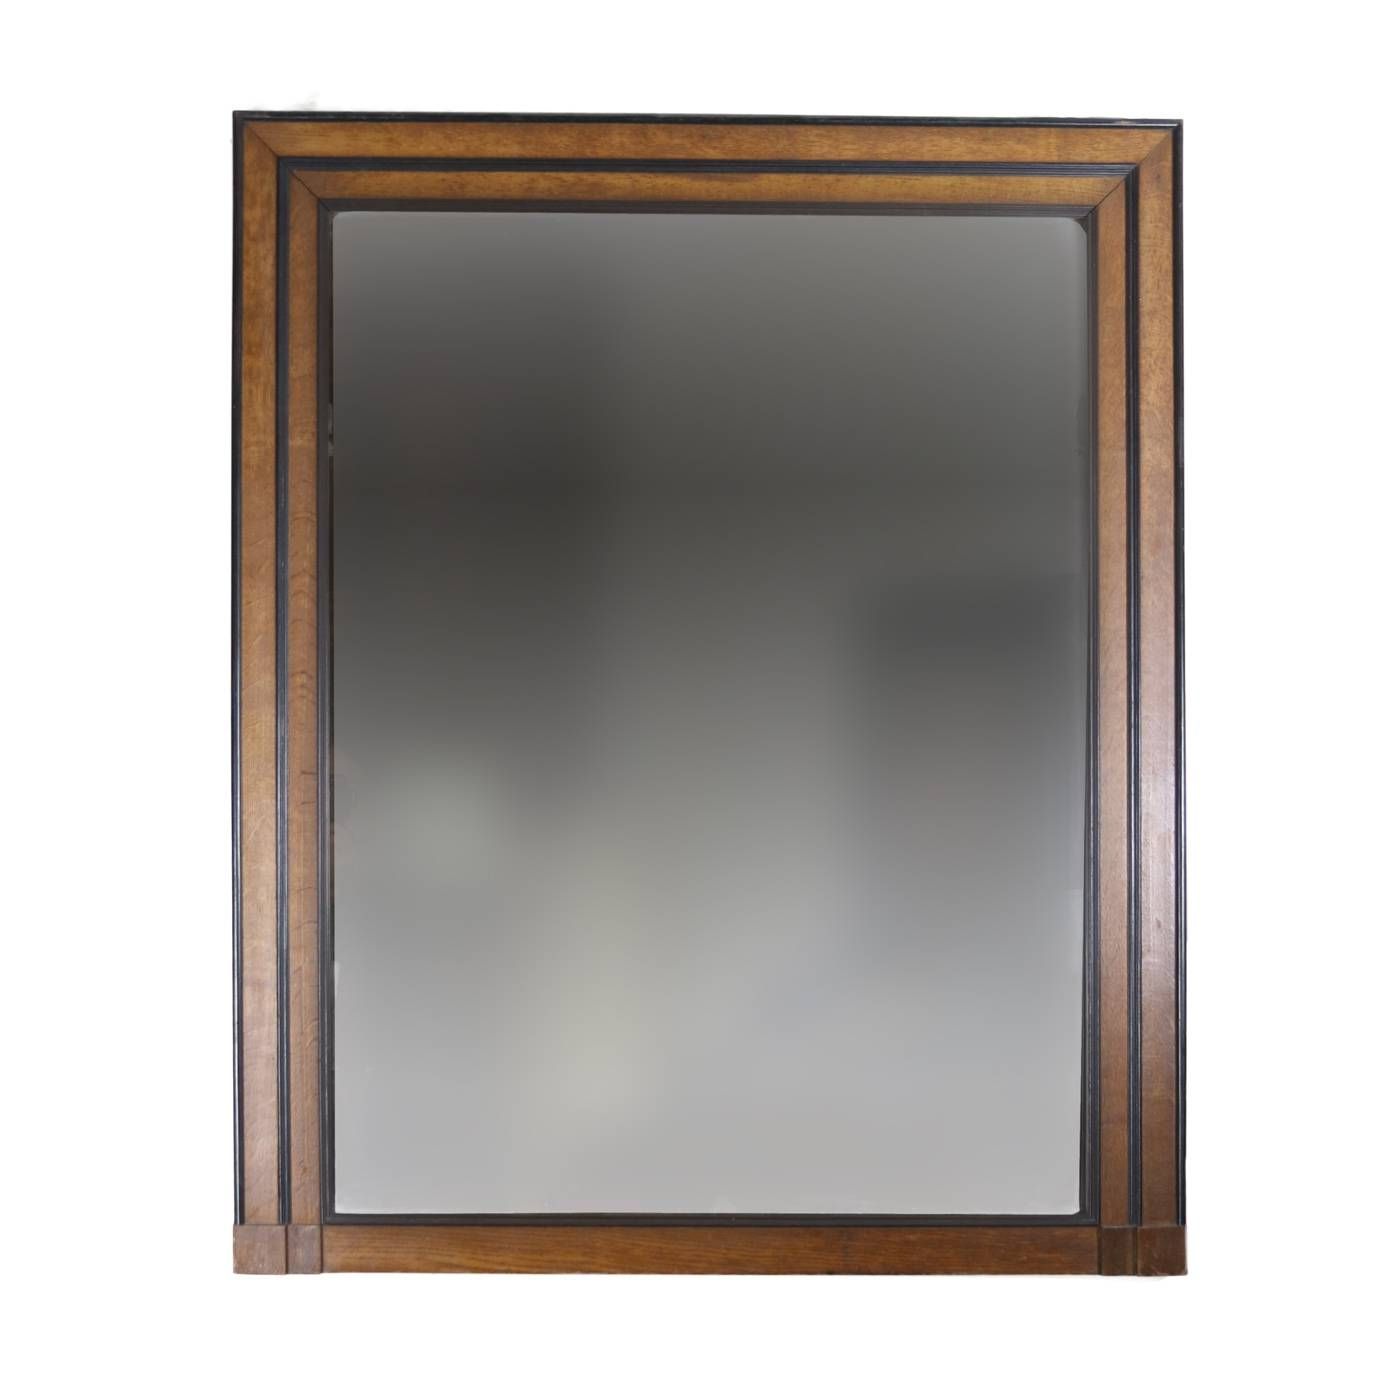 Handsome Large English Oak And Ebony Mirror Frame; Circa 1840 Intended For Large Oak Mirrors (View 10 of 25)